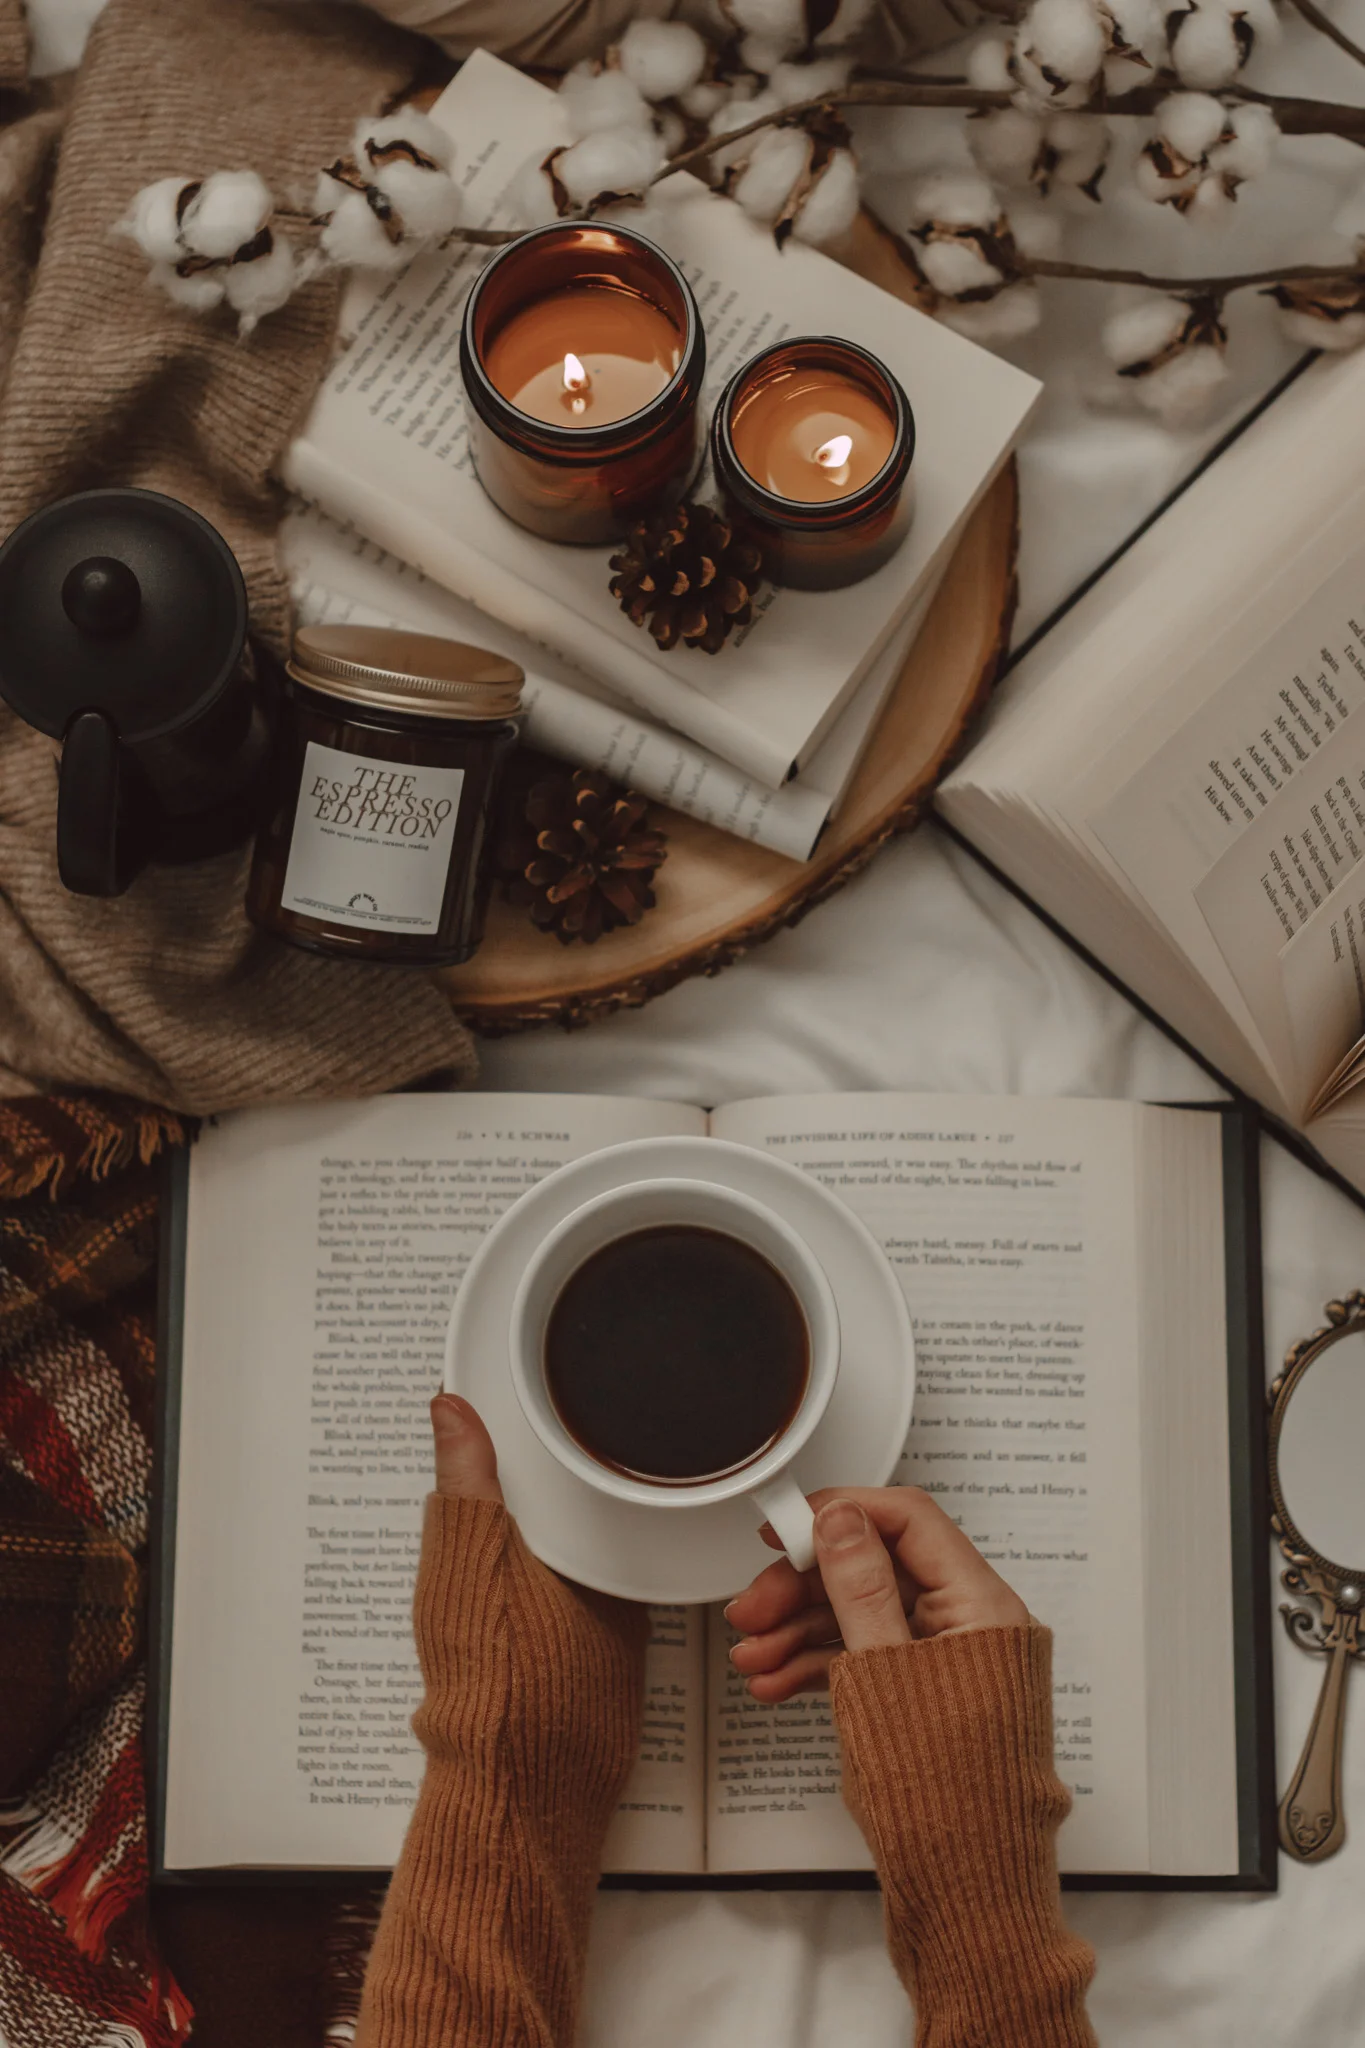 Using My Favorite Quotes to Convince You to Read My Favorite Books by The Espresso Edition cozy bookish blog